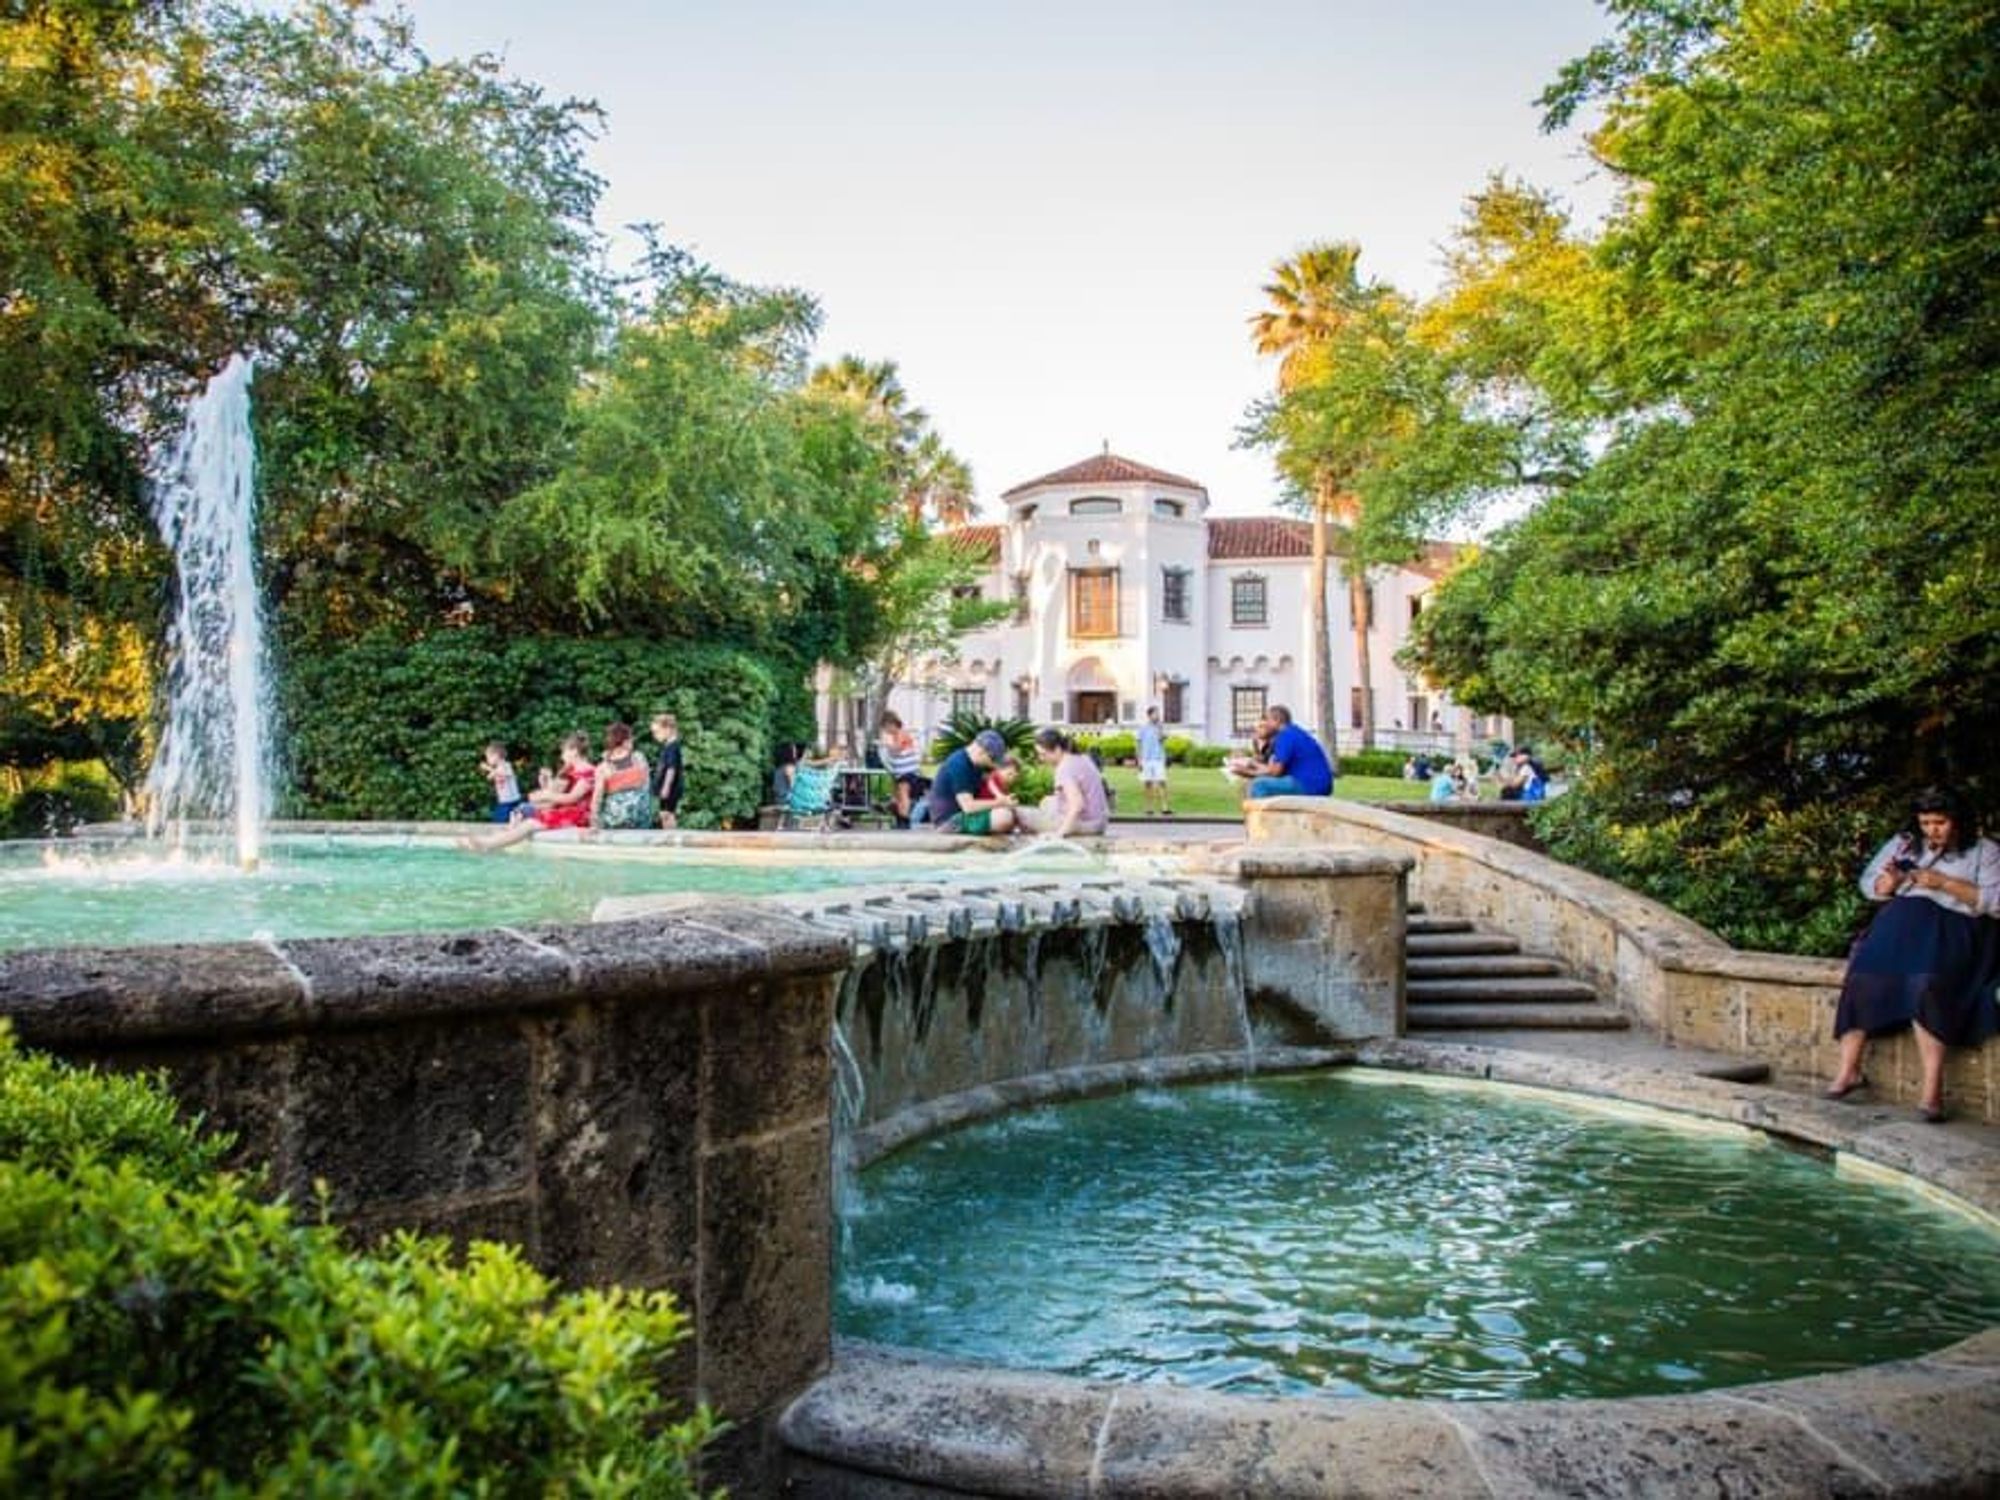 The Spanish-revival McNay mansion behind a water fountain and a crowd of visitors.